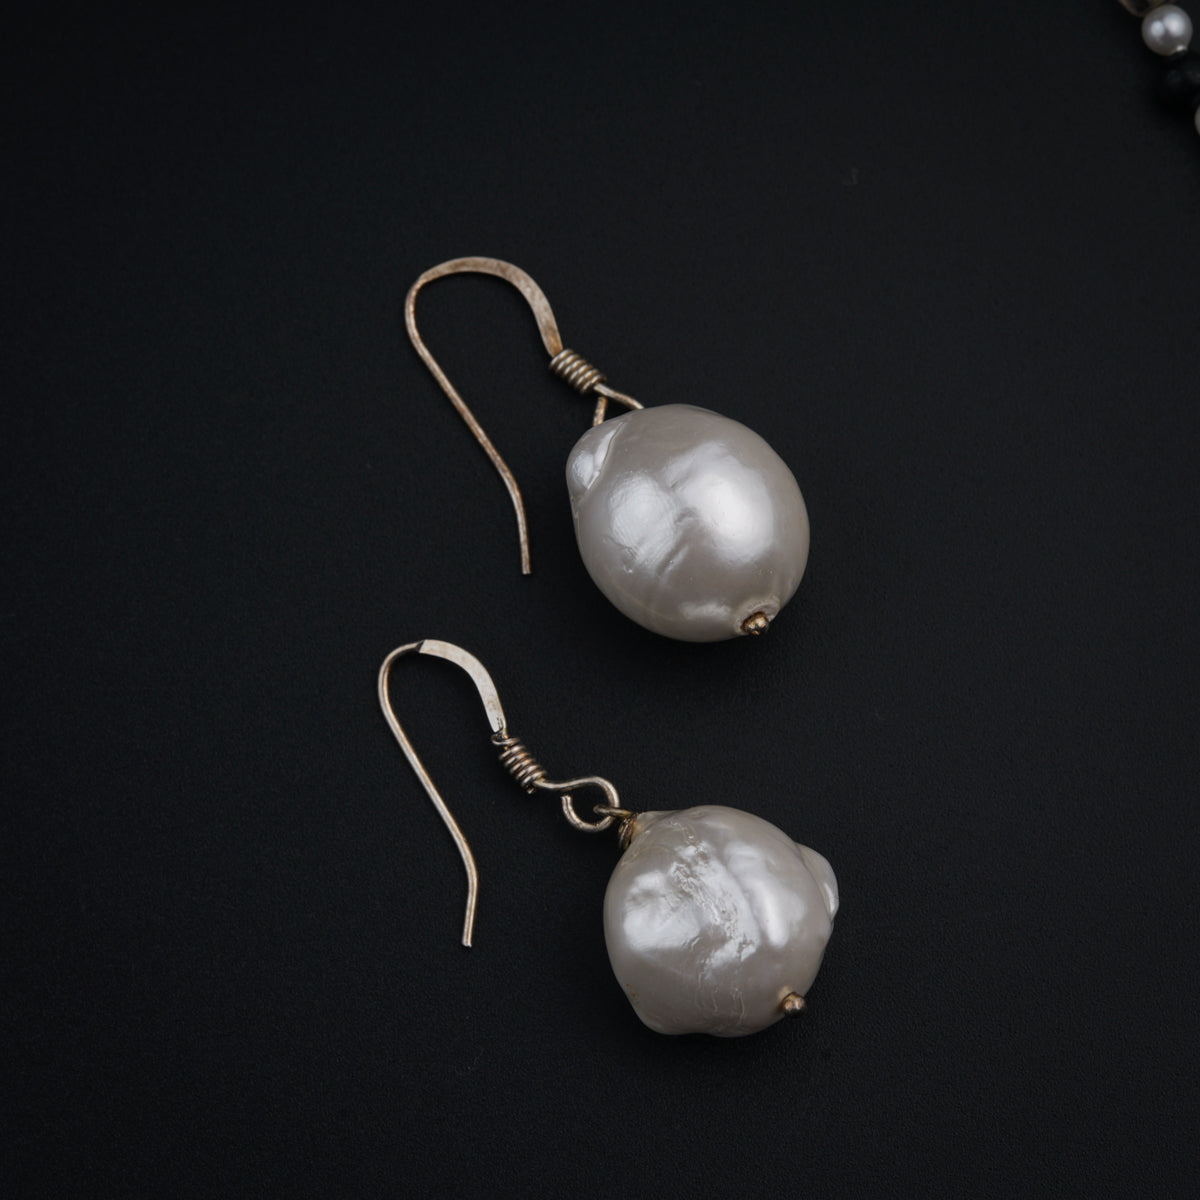 a pair of pearl earrings on a black background